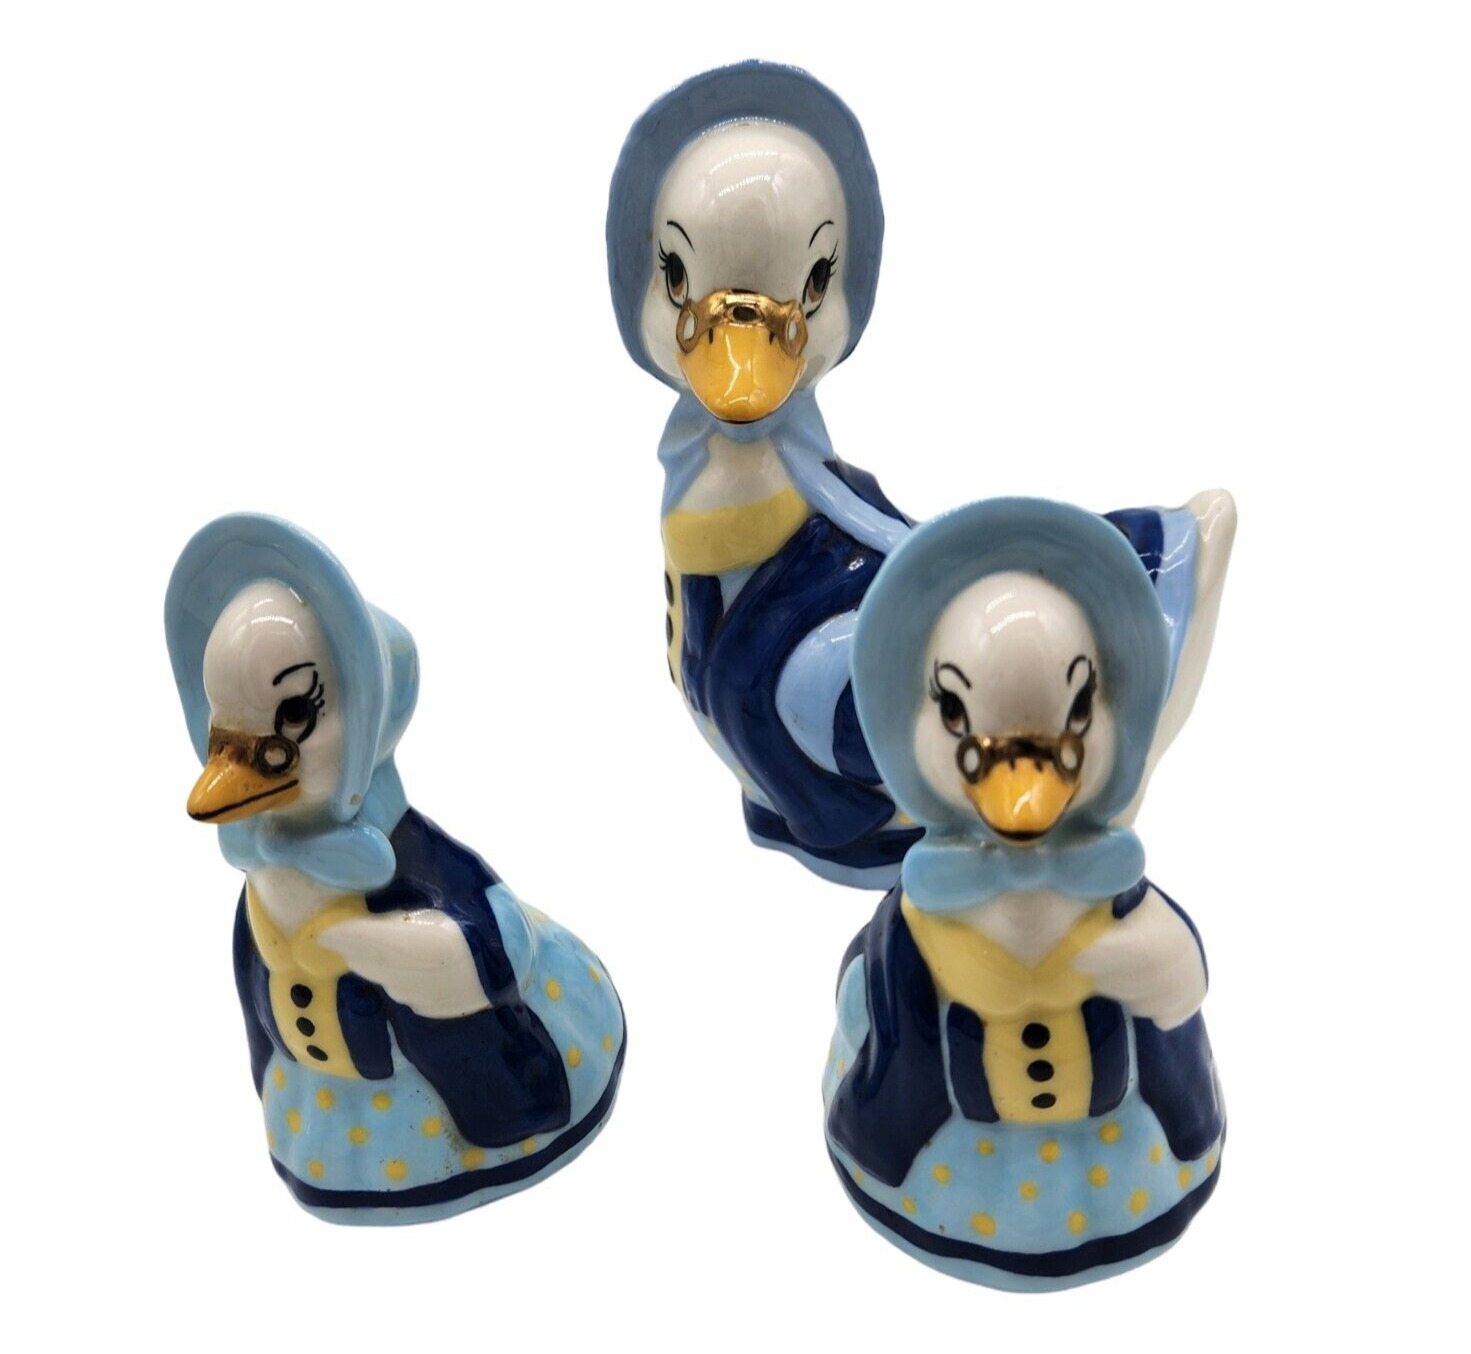 Vintage Anthropomorphic Mother Goose Salt and Pepper Shakers 3 Piece Set